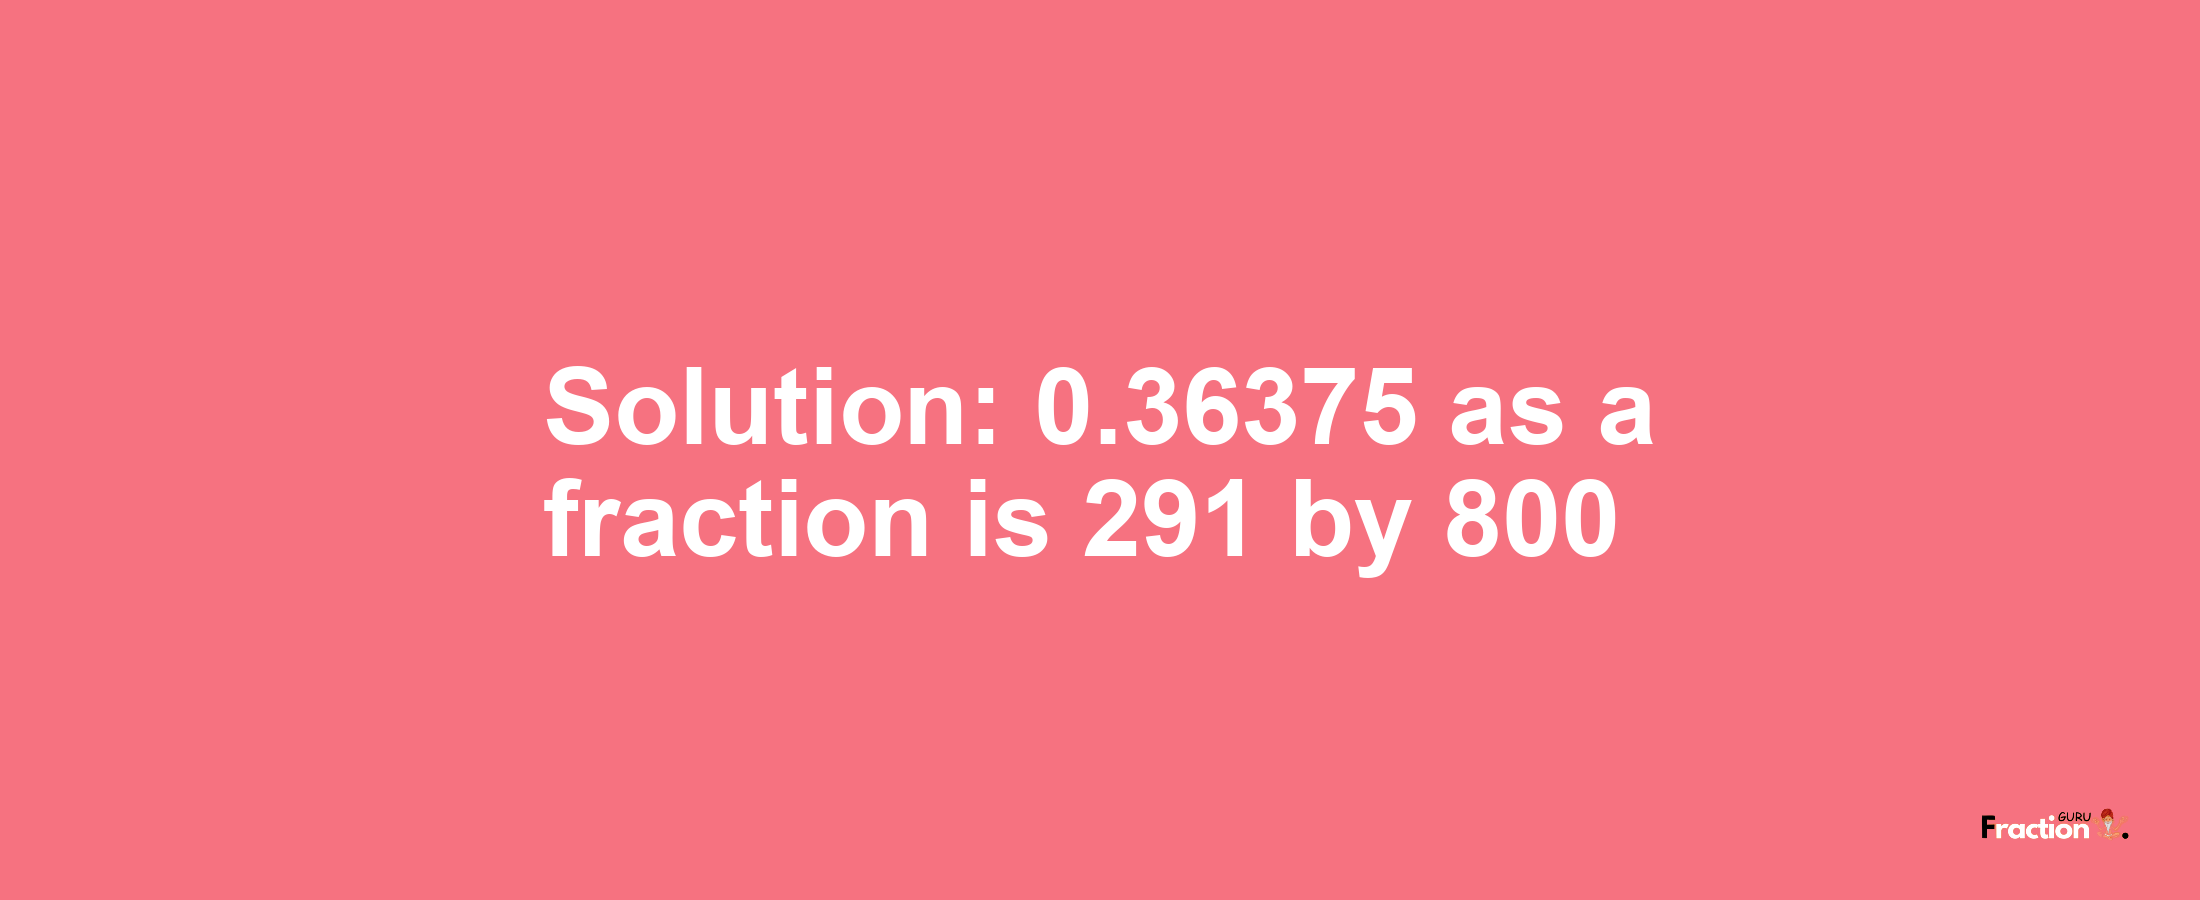 Solution:0.36375 as a fraction is 291/800